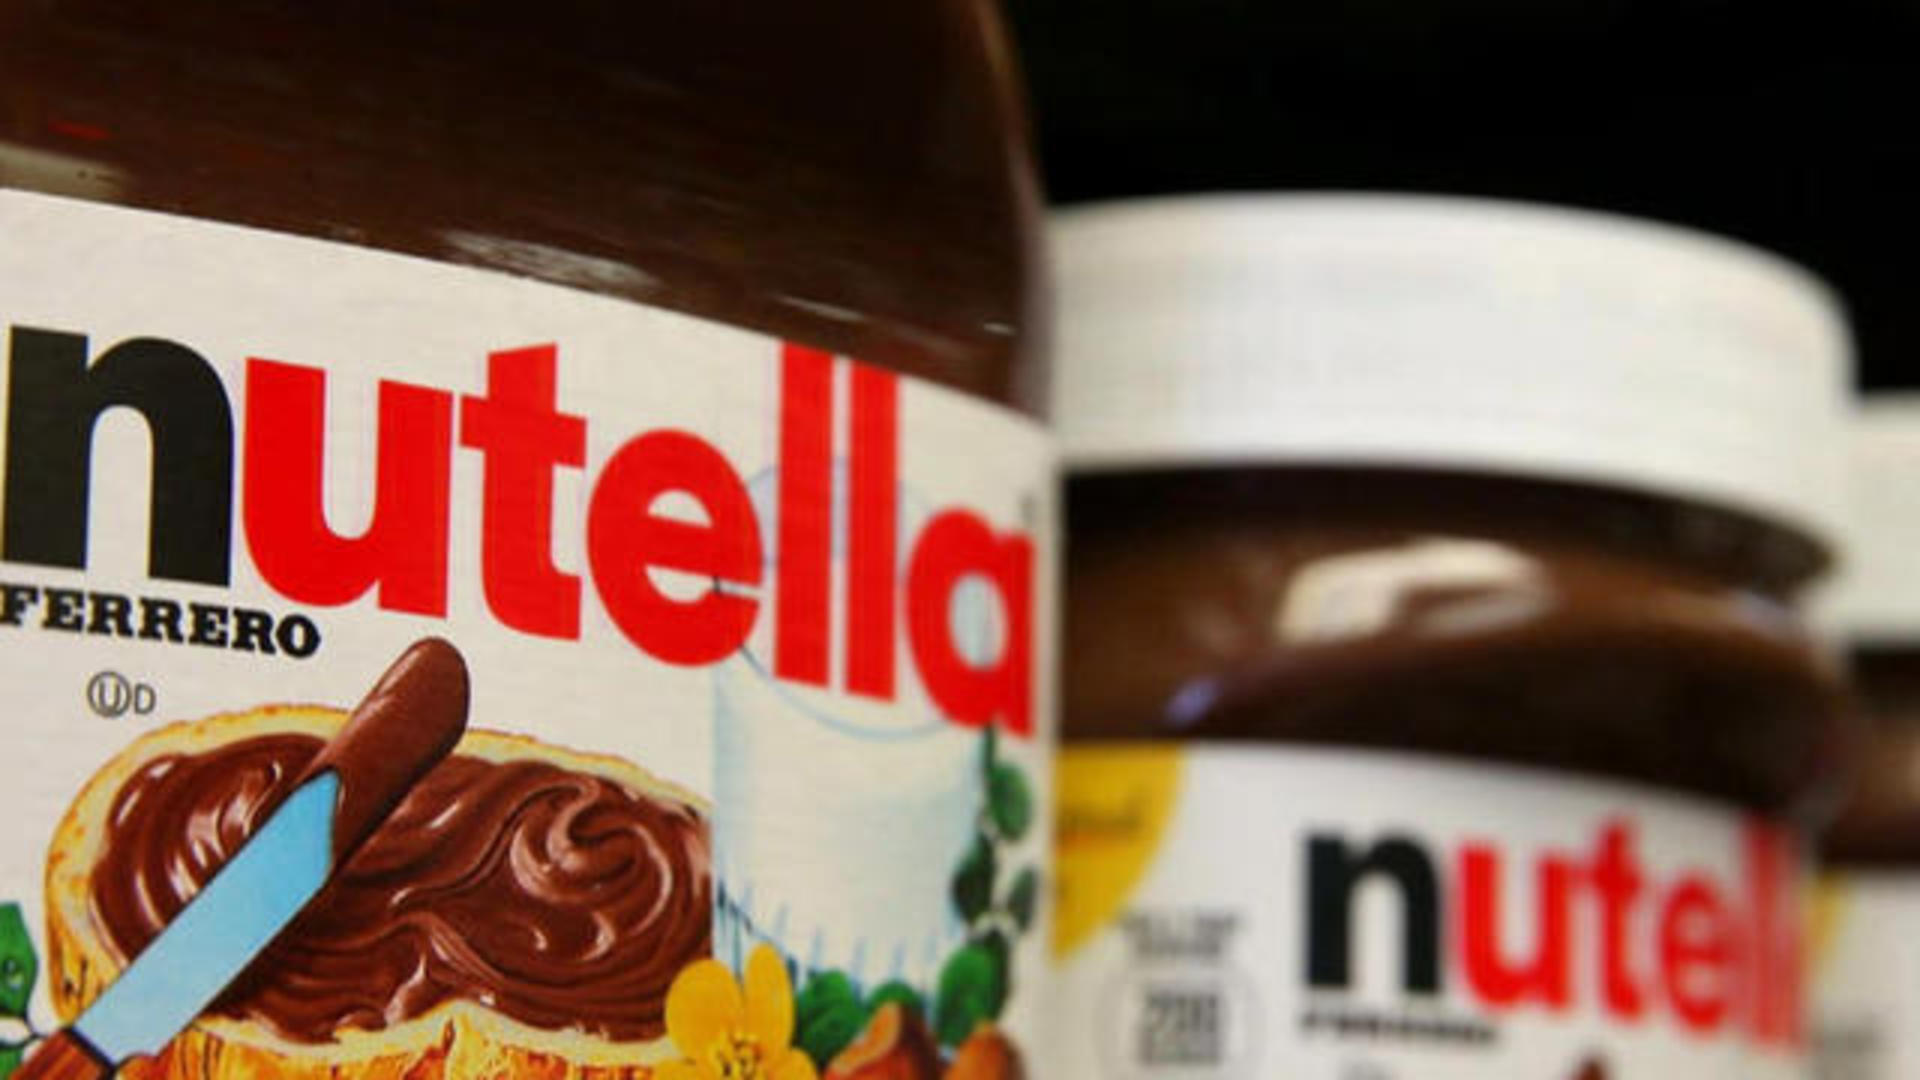 Cover books in Nutella - SA children work with commissioner on